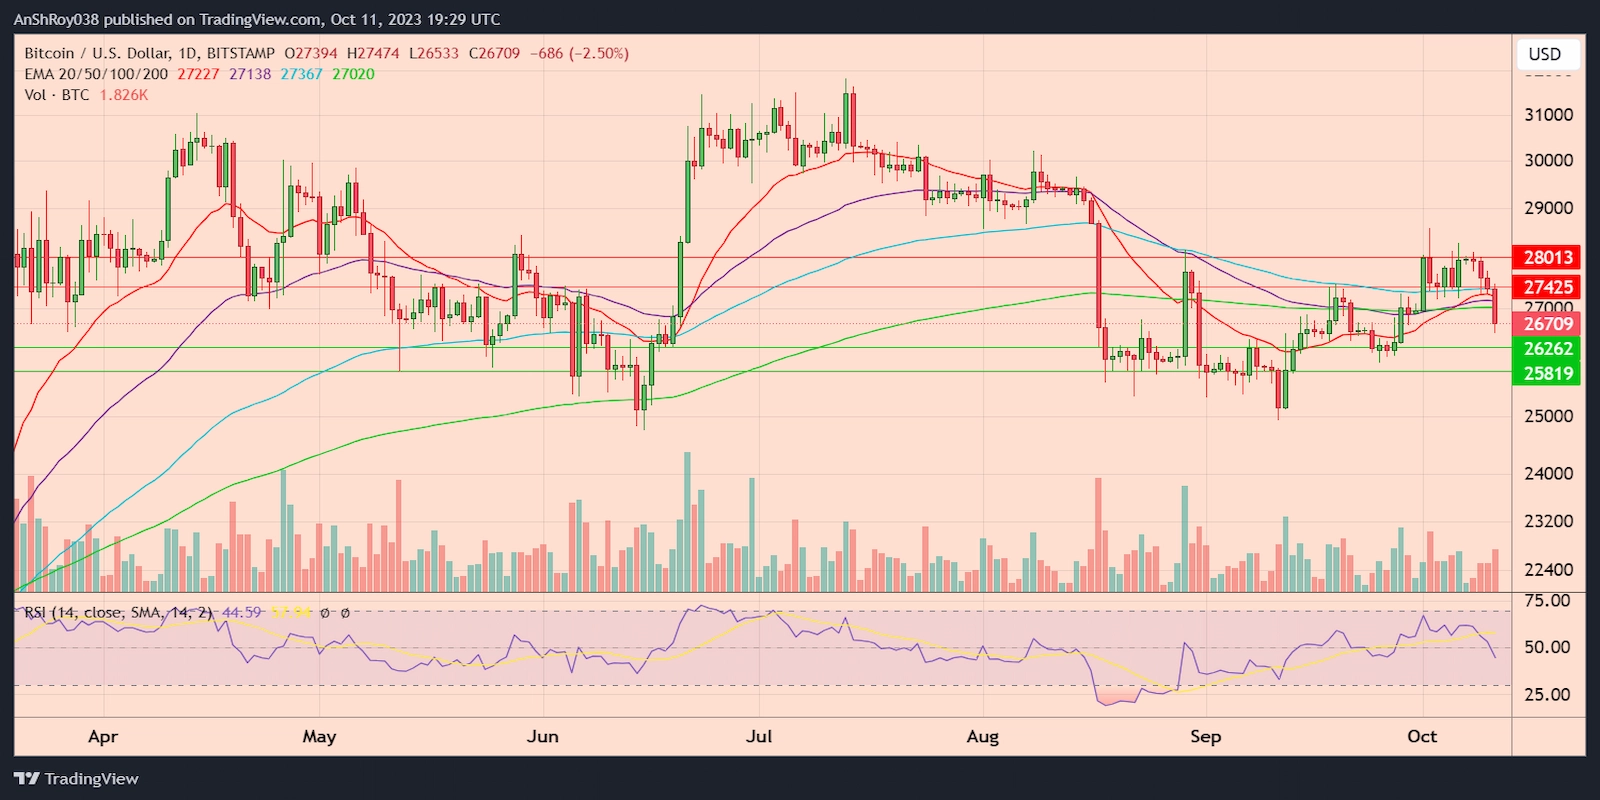 BTCUSD daily price chart with RSI.